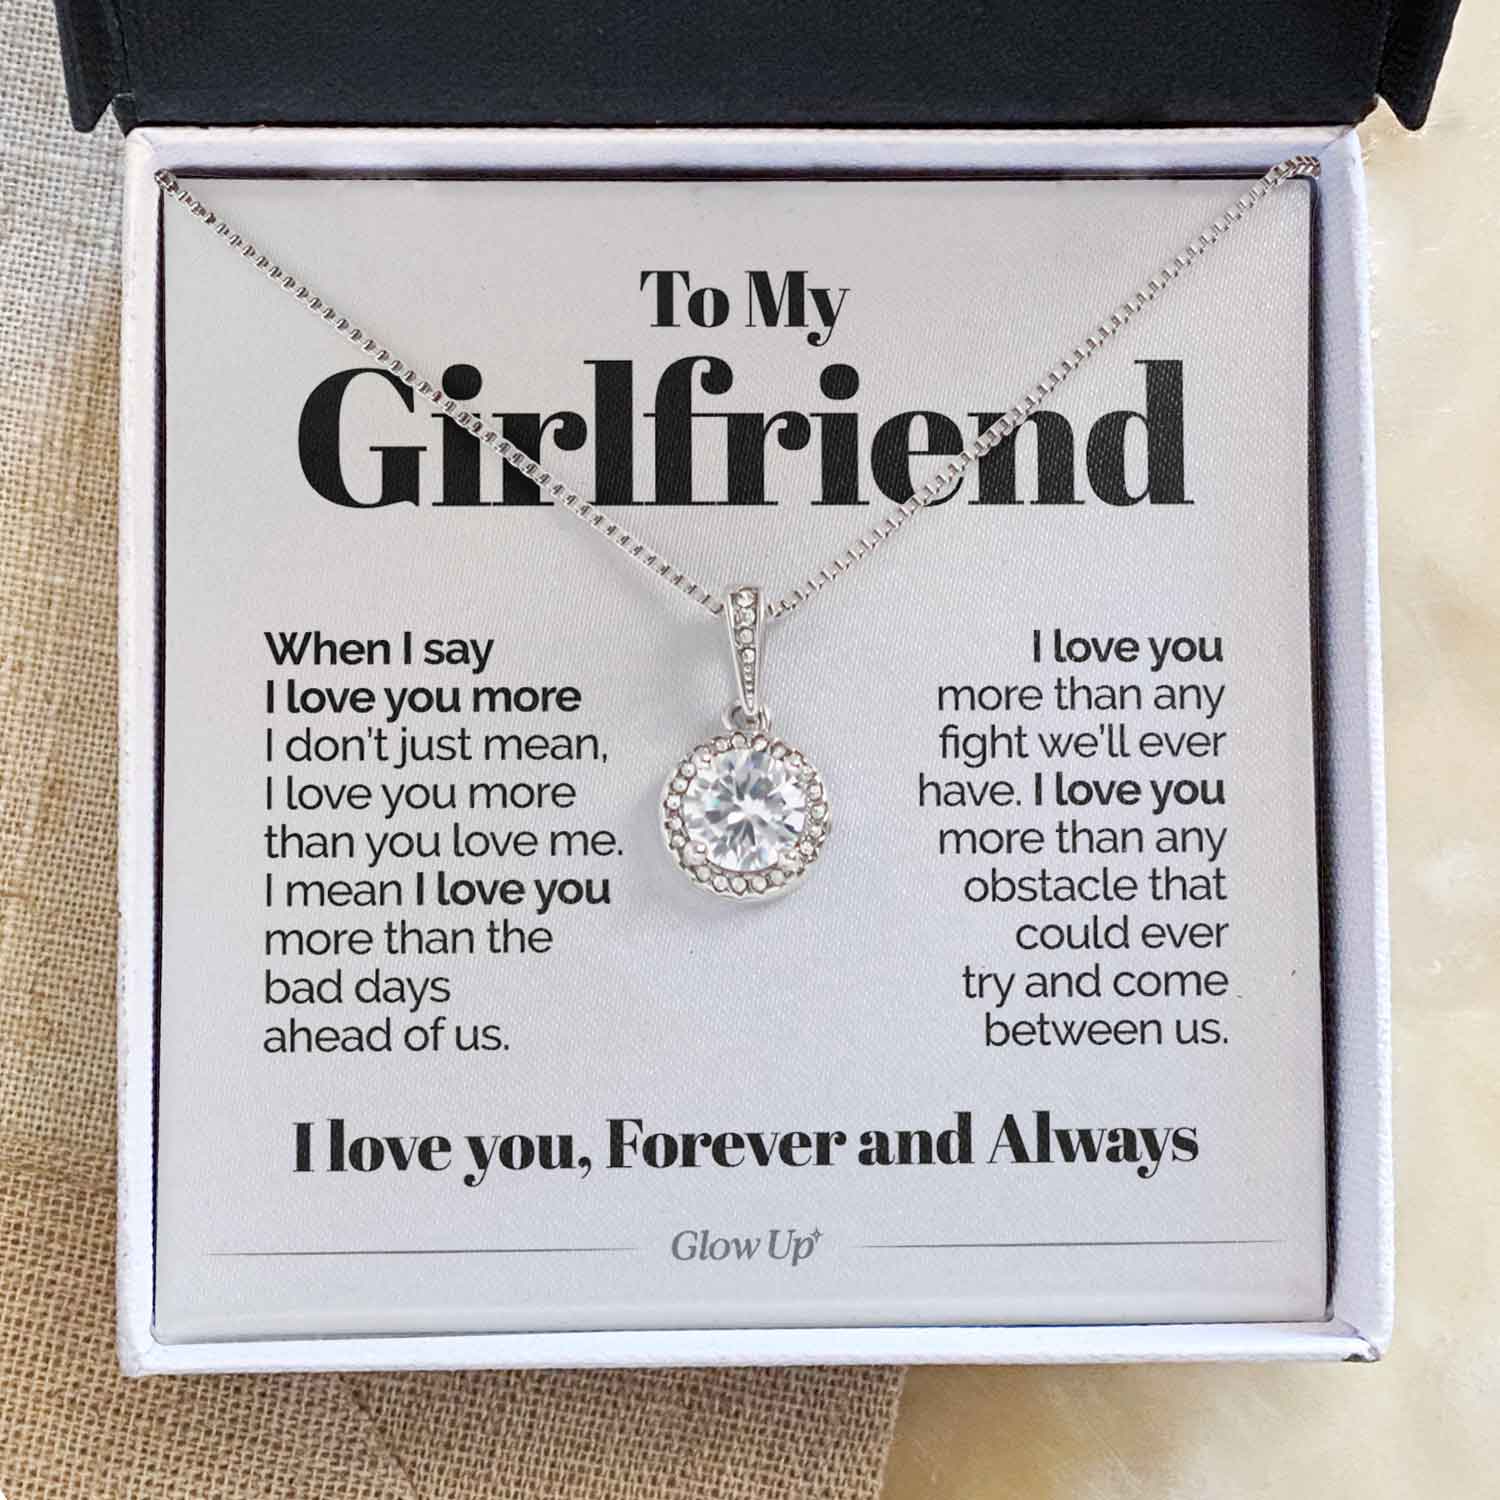 ShineOn Fulfillment Jewelry Mahogany Style Luxury Box To My Girlfriend - When I Say I Love You More - Eternal Hope Necklace